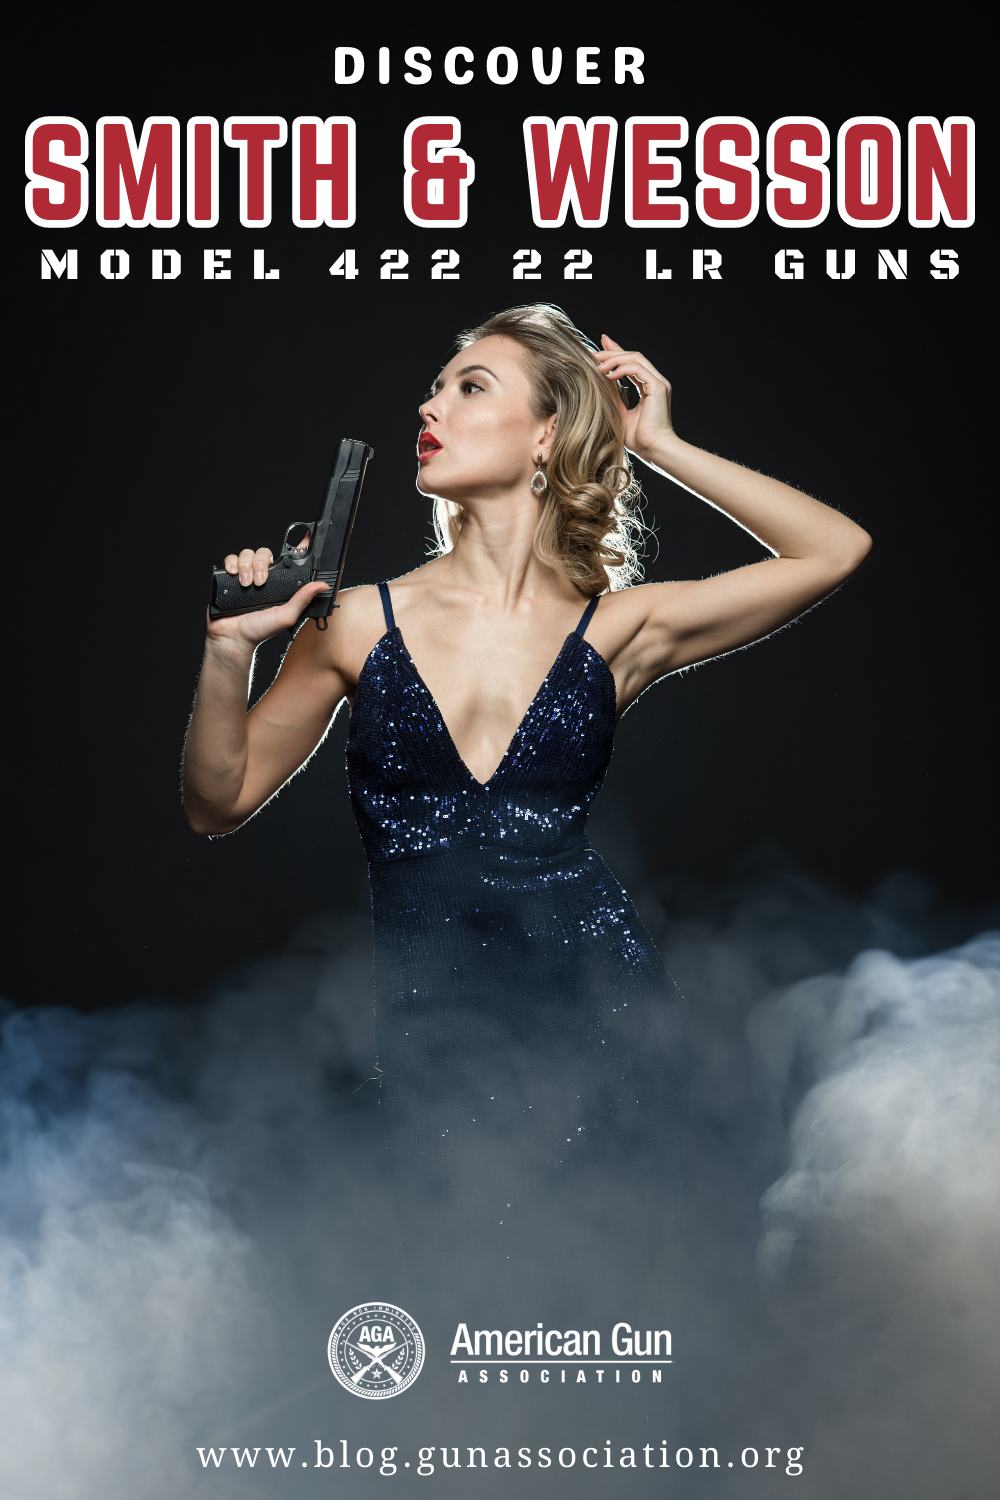 Discover Smith and Wesson Model 422 22 LR Gun Review